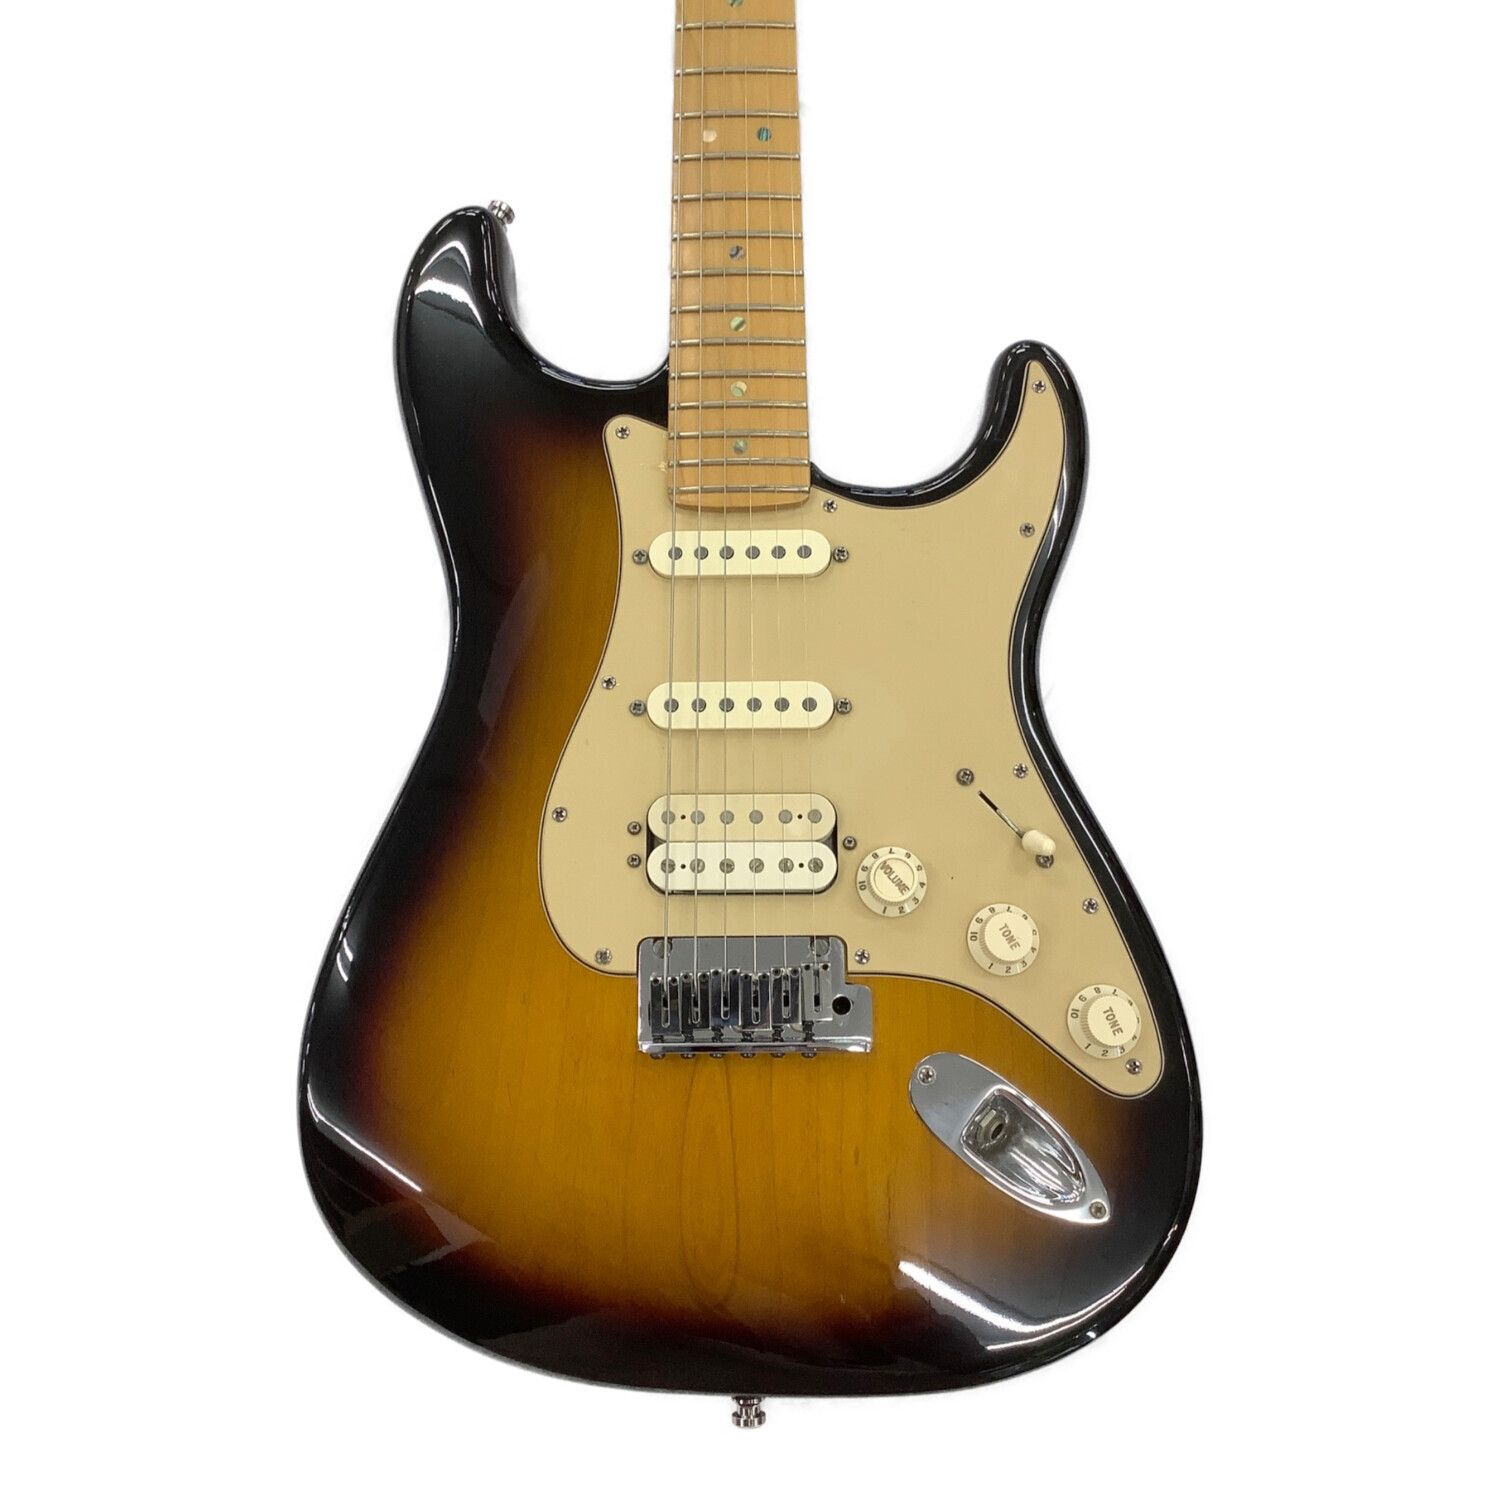 FENDER USA (フェンダーＵＳＡ) エレキギター American Deluxe HSS